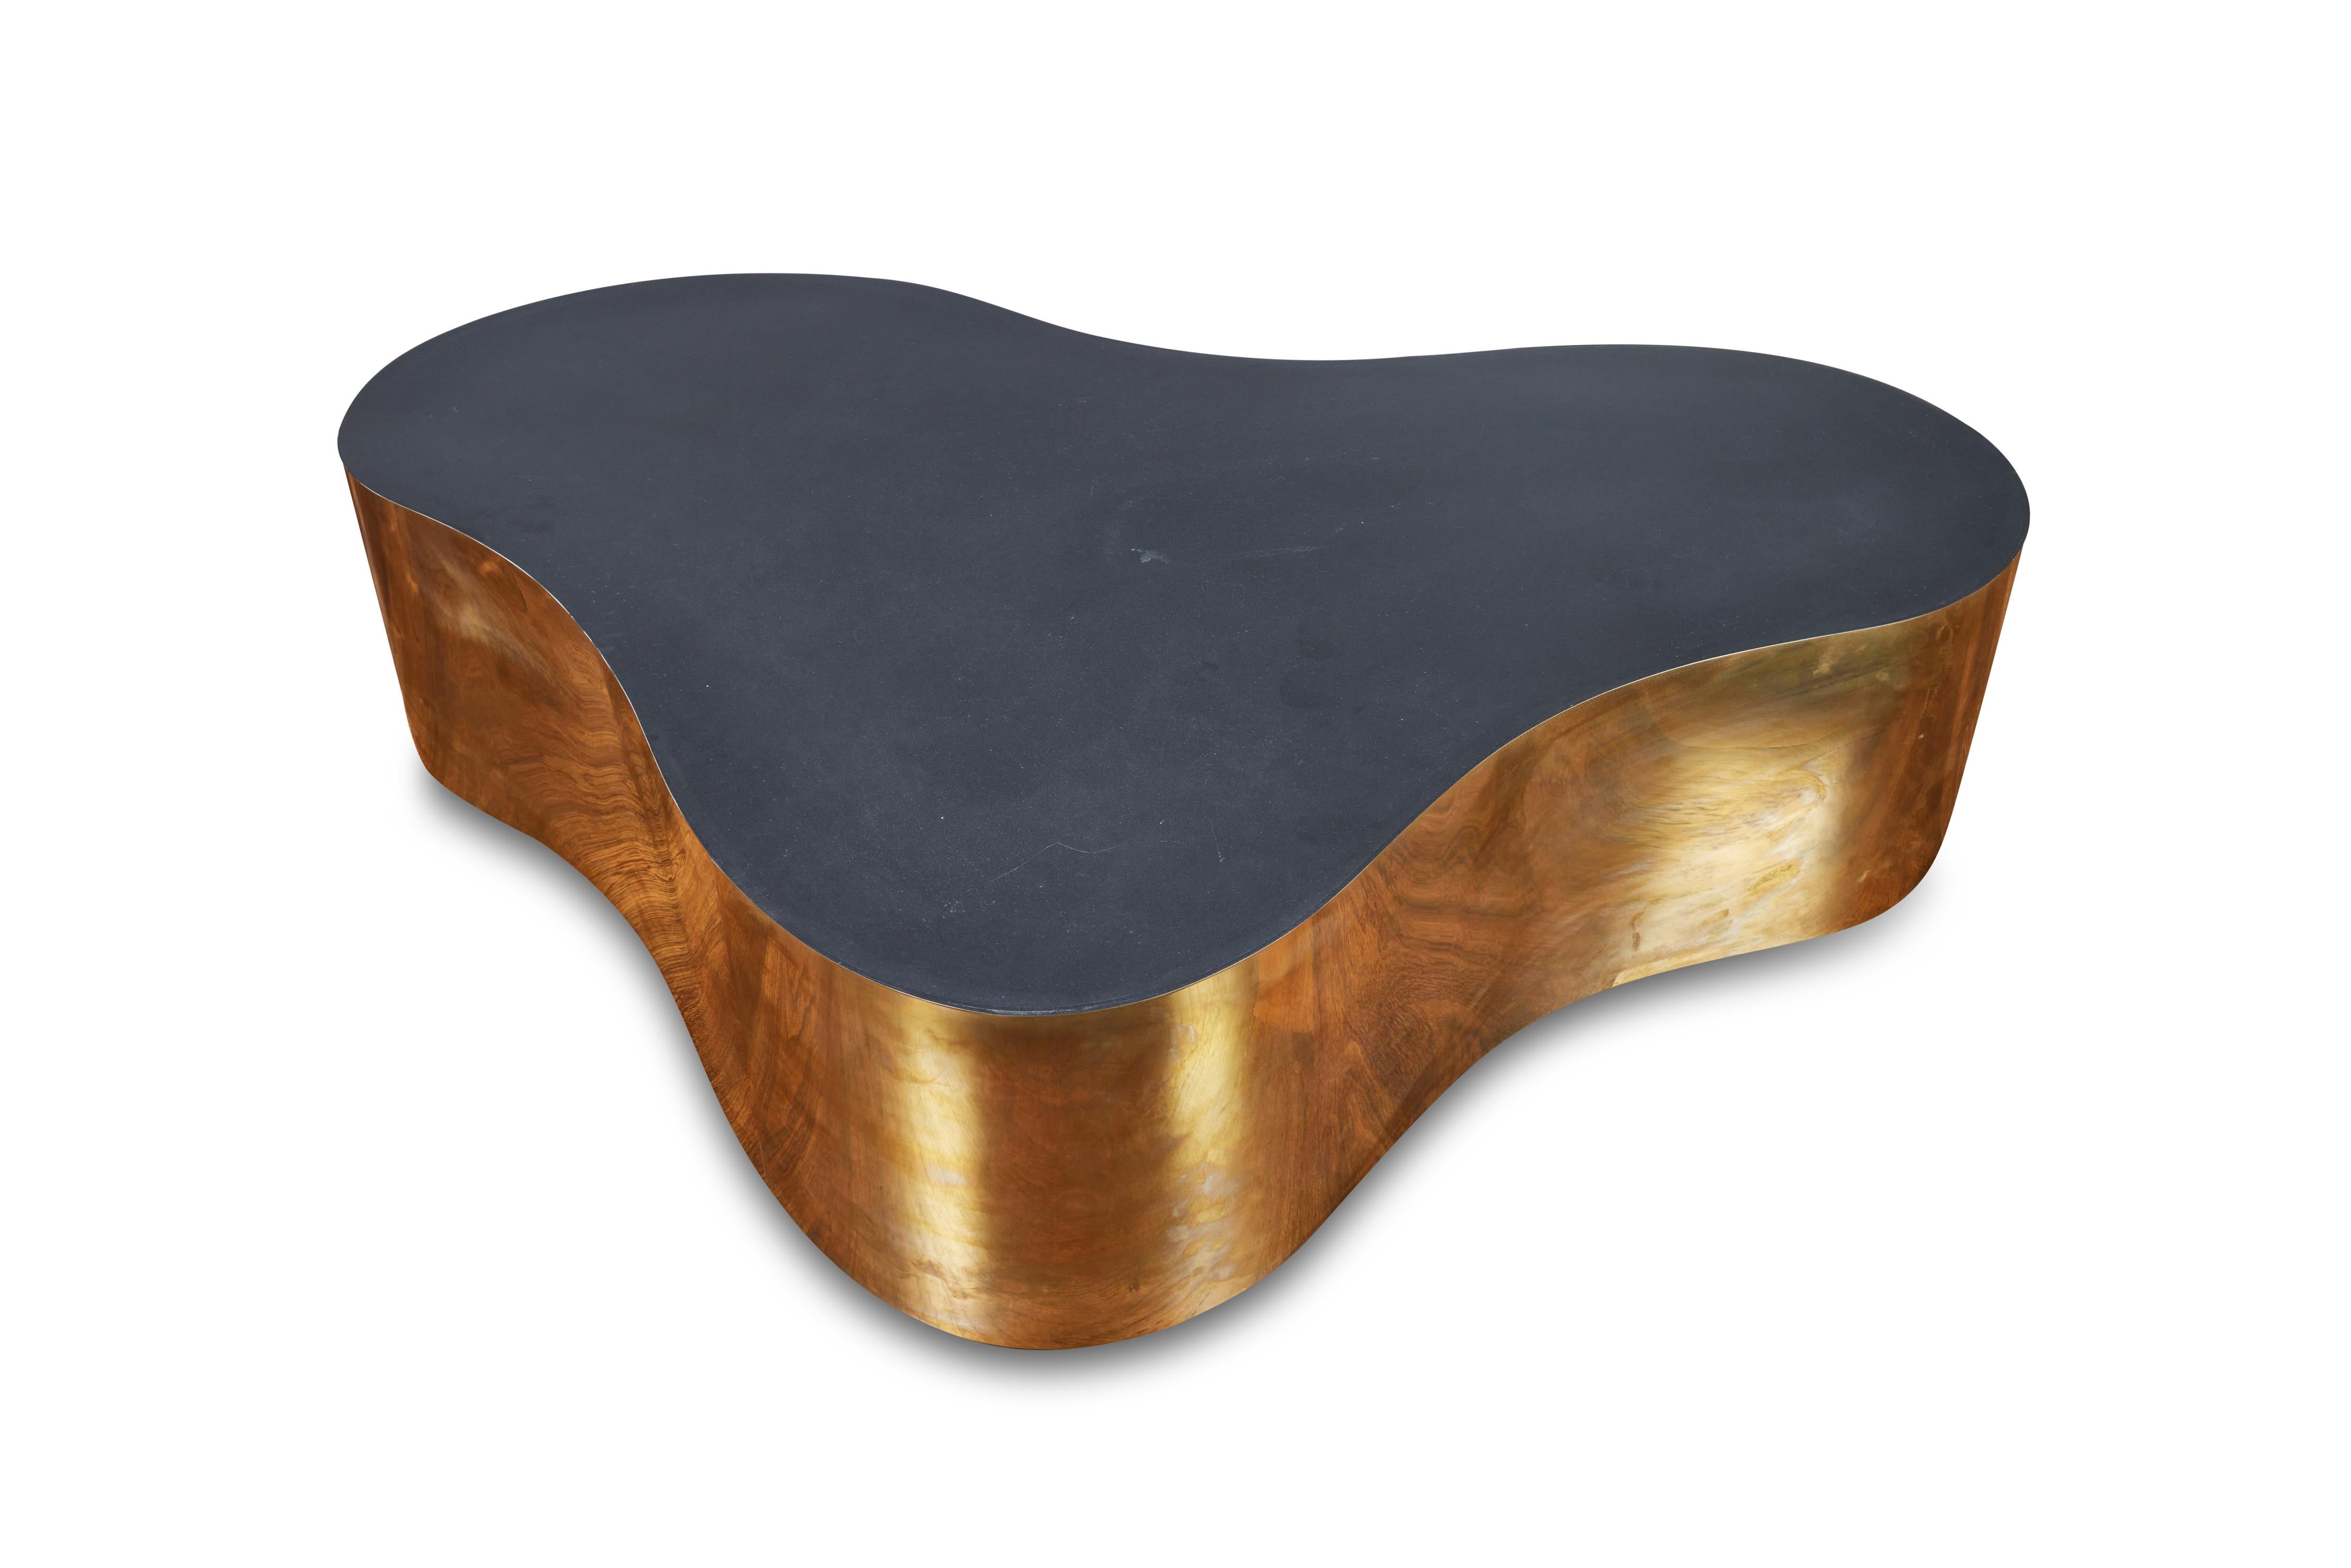 Late 20th Century Biomorphic Brass Coffee Table In the Style of Karl Springer